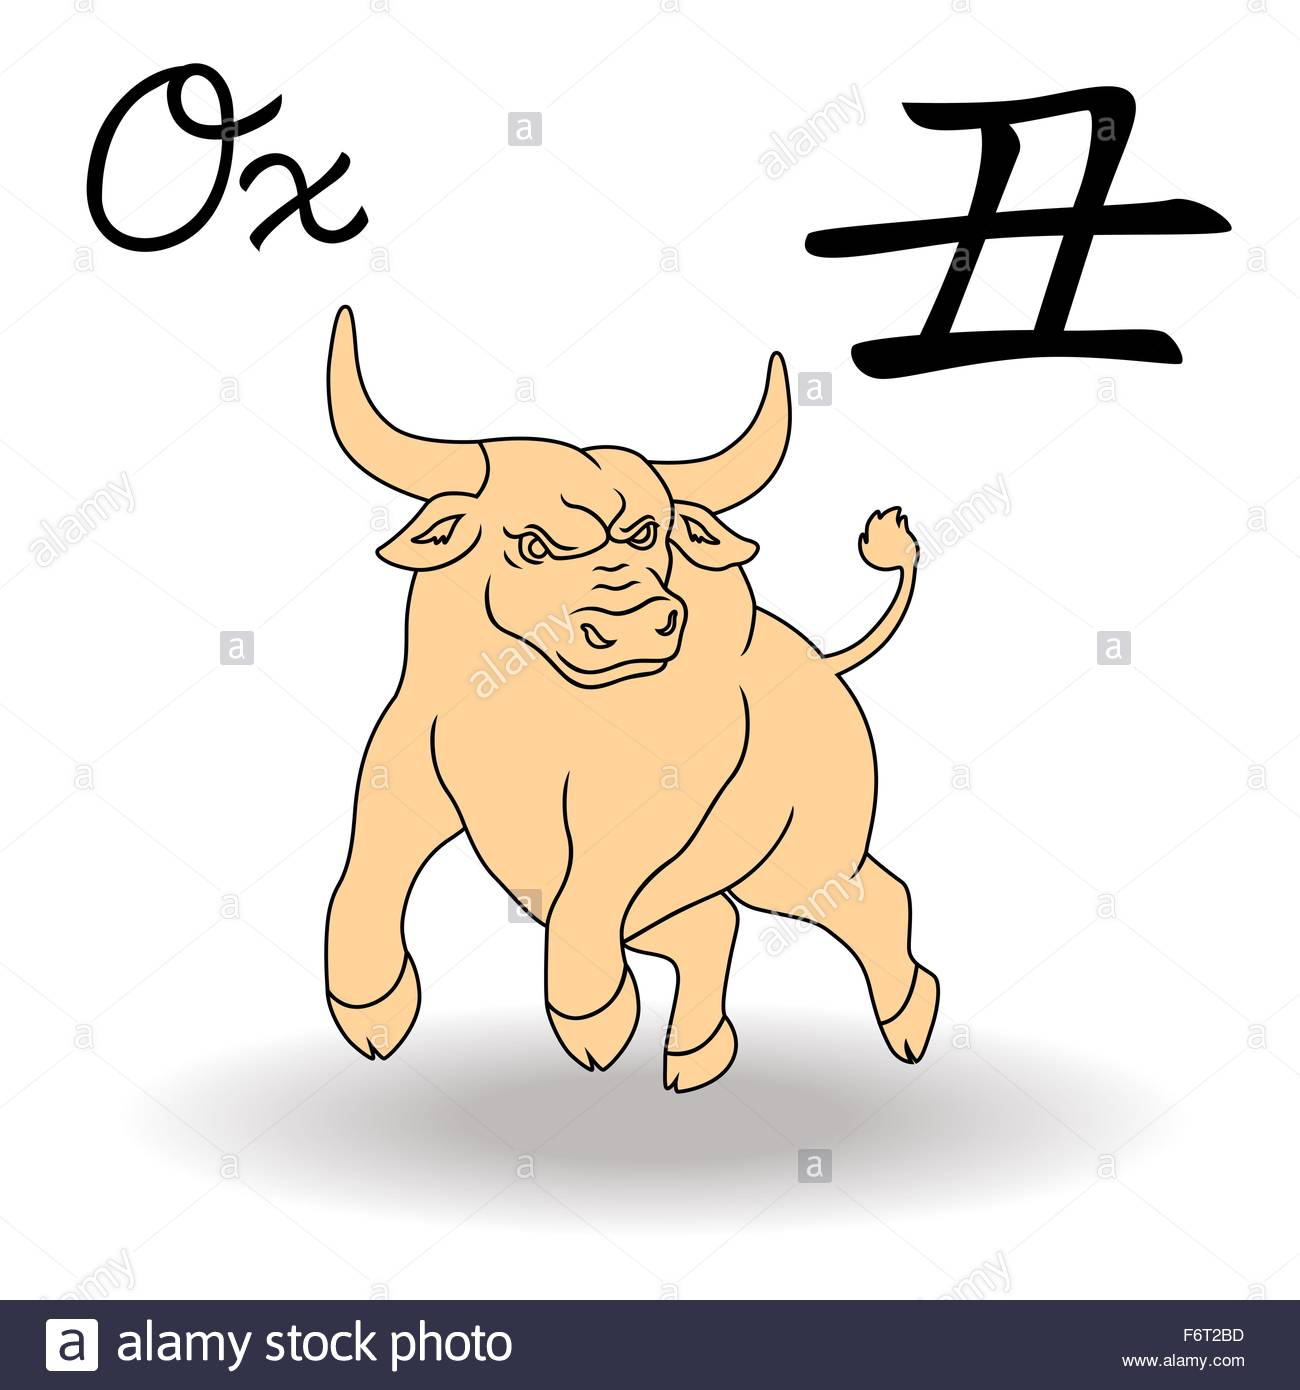 Eastern Zodiac Sign Ox, Symbol Of New Year In Chinese